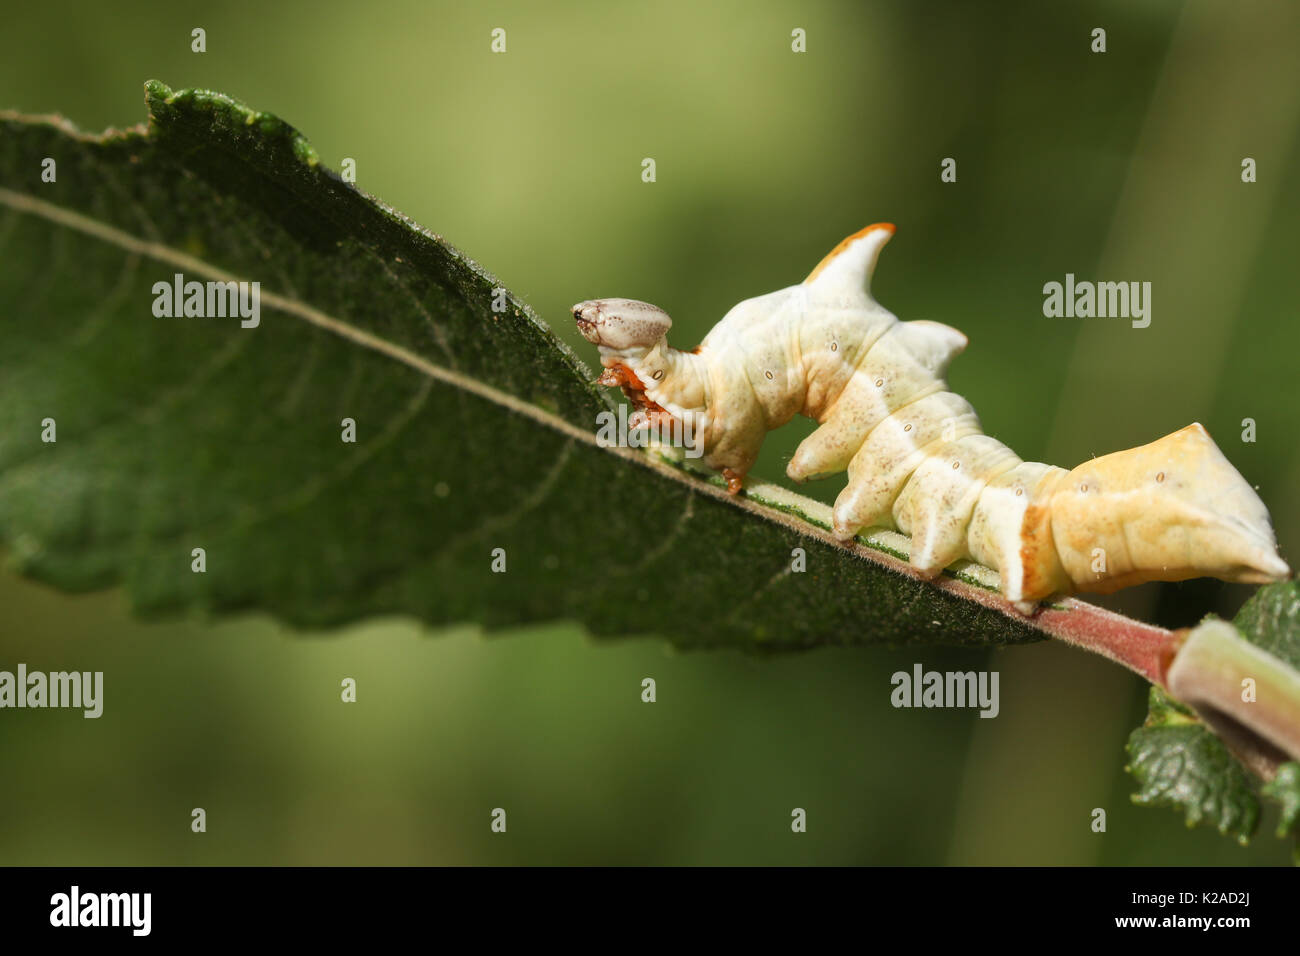 A beautiful Pebble Prominent Moth Caterpillar (Notodonta ziczac) feeding on a willow leaf. Stock Photo